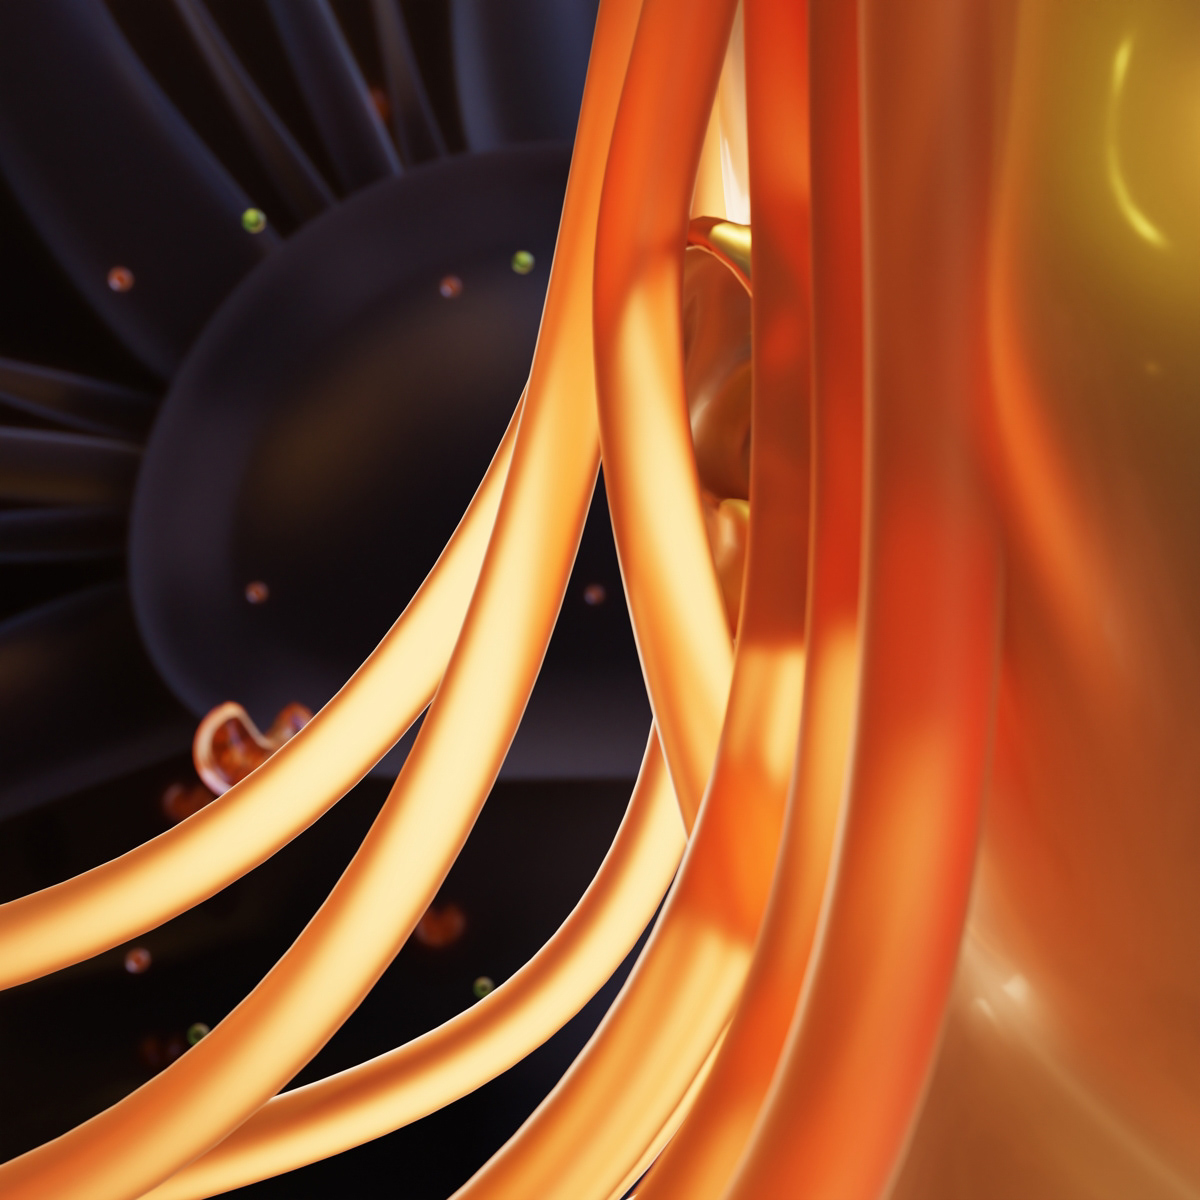 abstract peach hearts plasma blender 3d curves fantasy 3d artist energy place of power